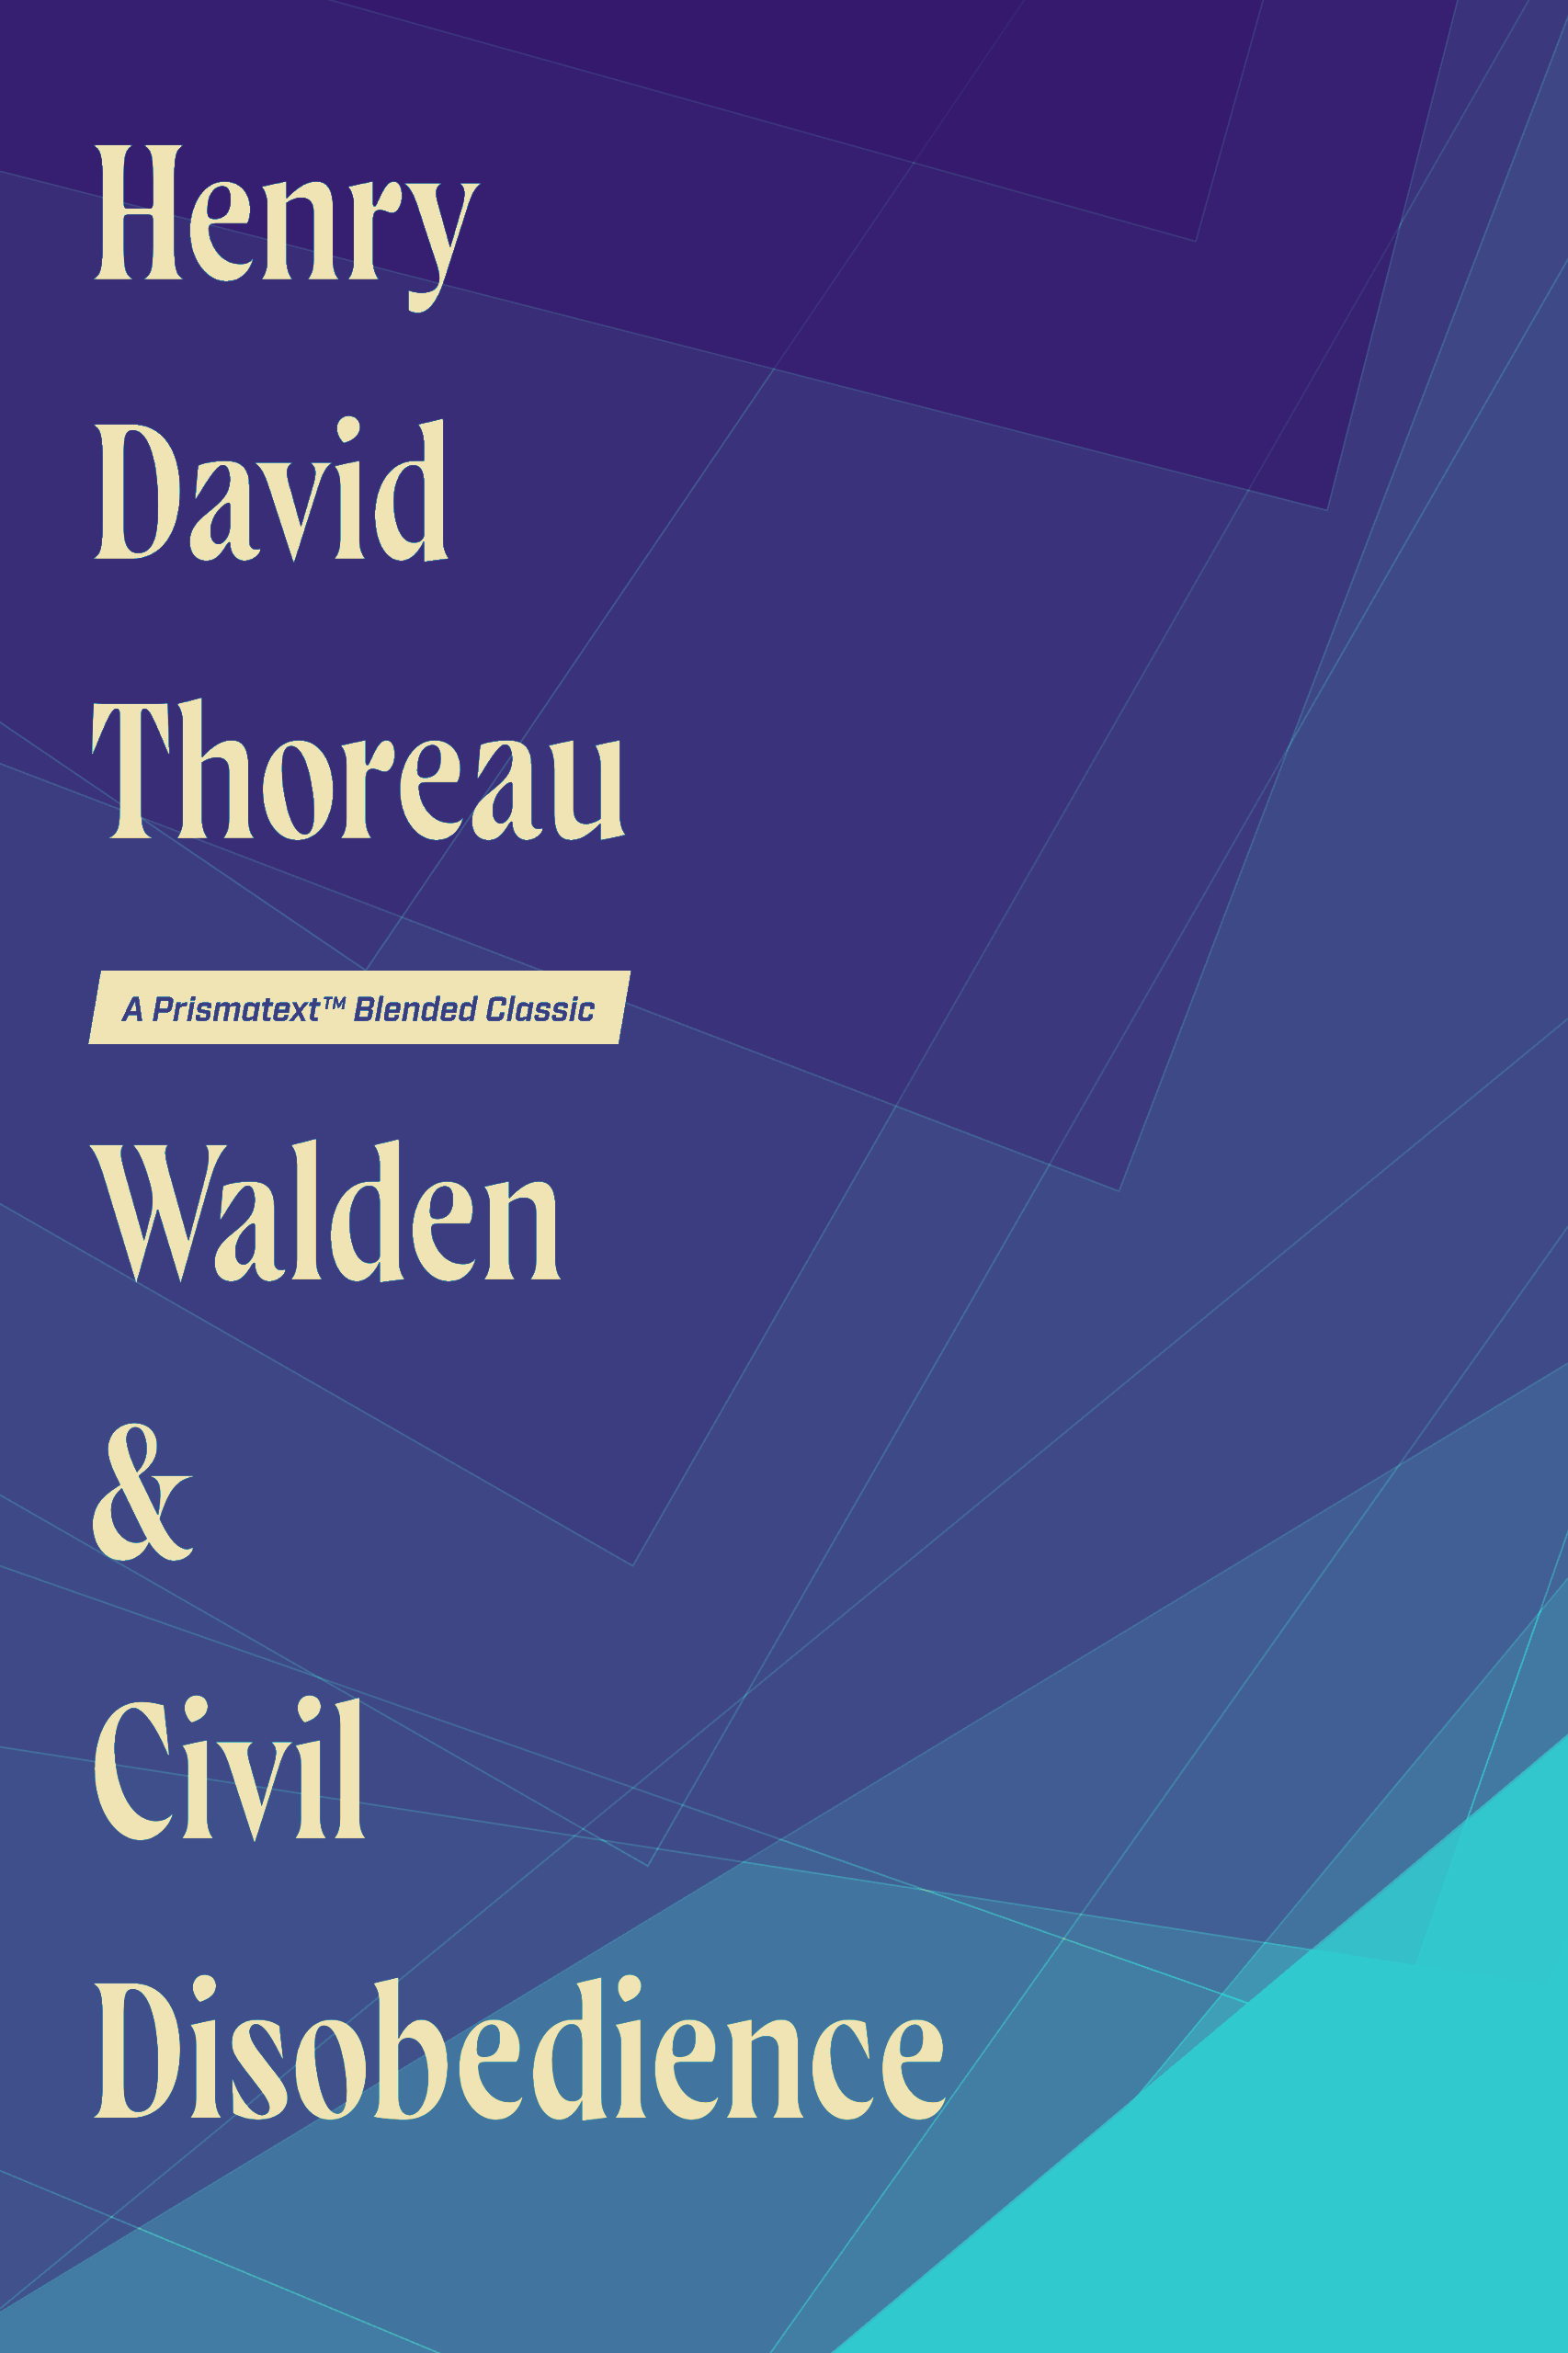 Walden & Civil Disobedience by Henry Thoreau